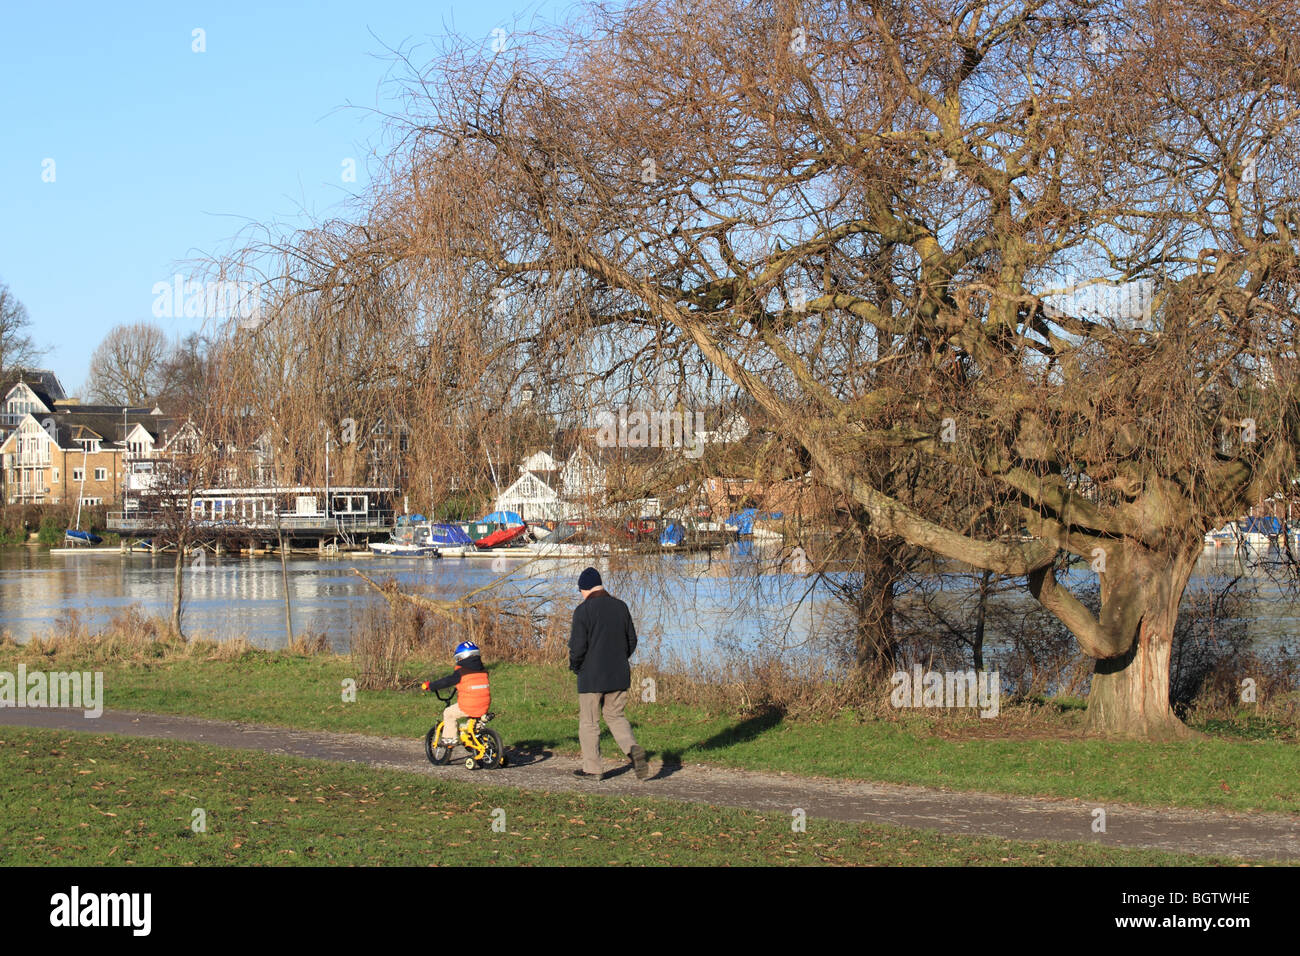 Child on bicycle and man at the riverside open space at Sadler's Ride, Hurst Park, East Molesey, Surrey, England, Great Britain, UK, Europe Stock Photo